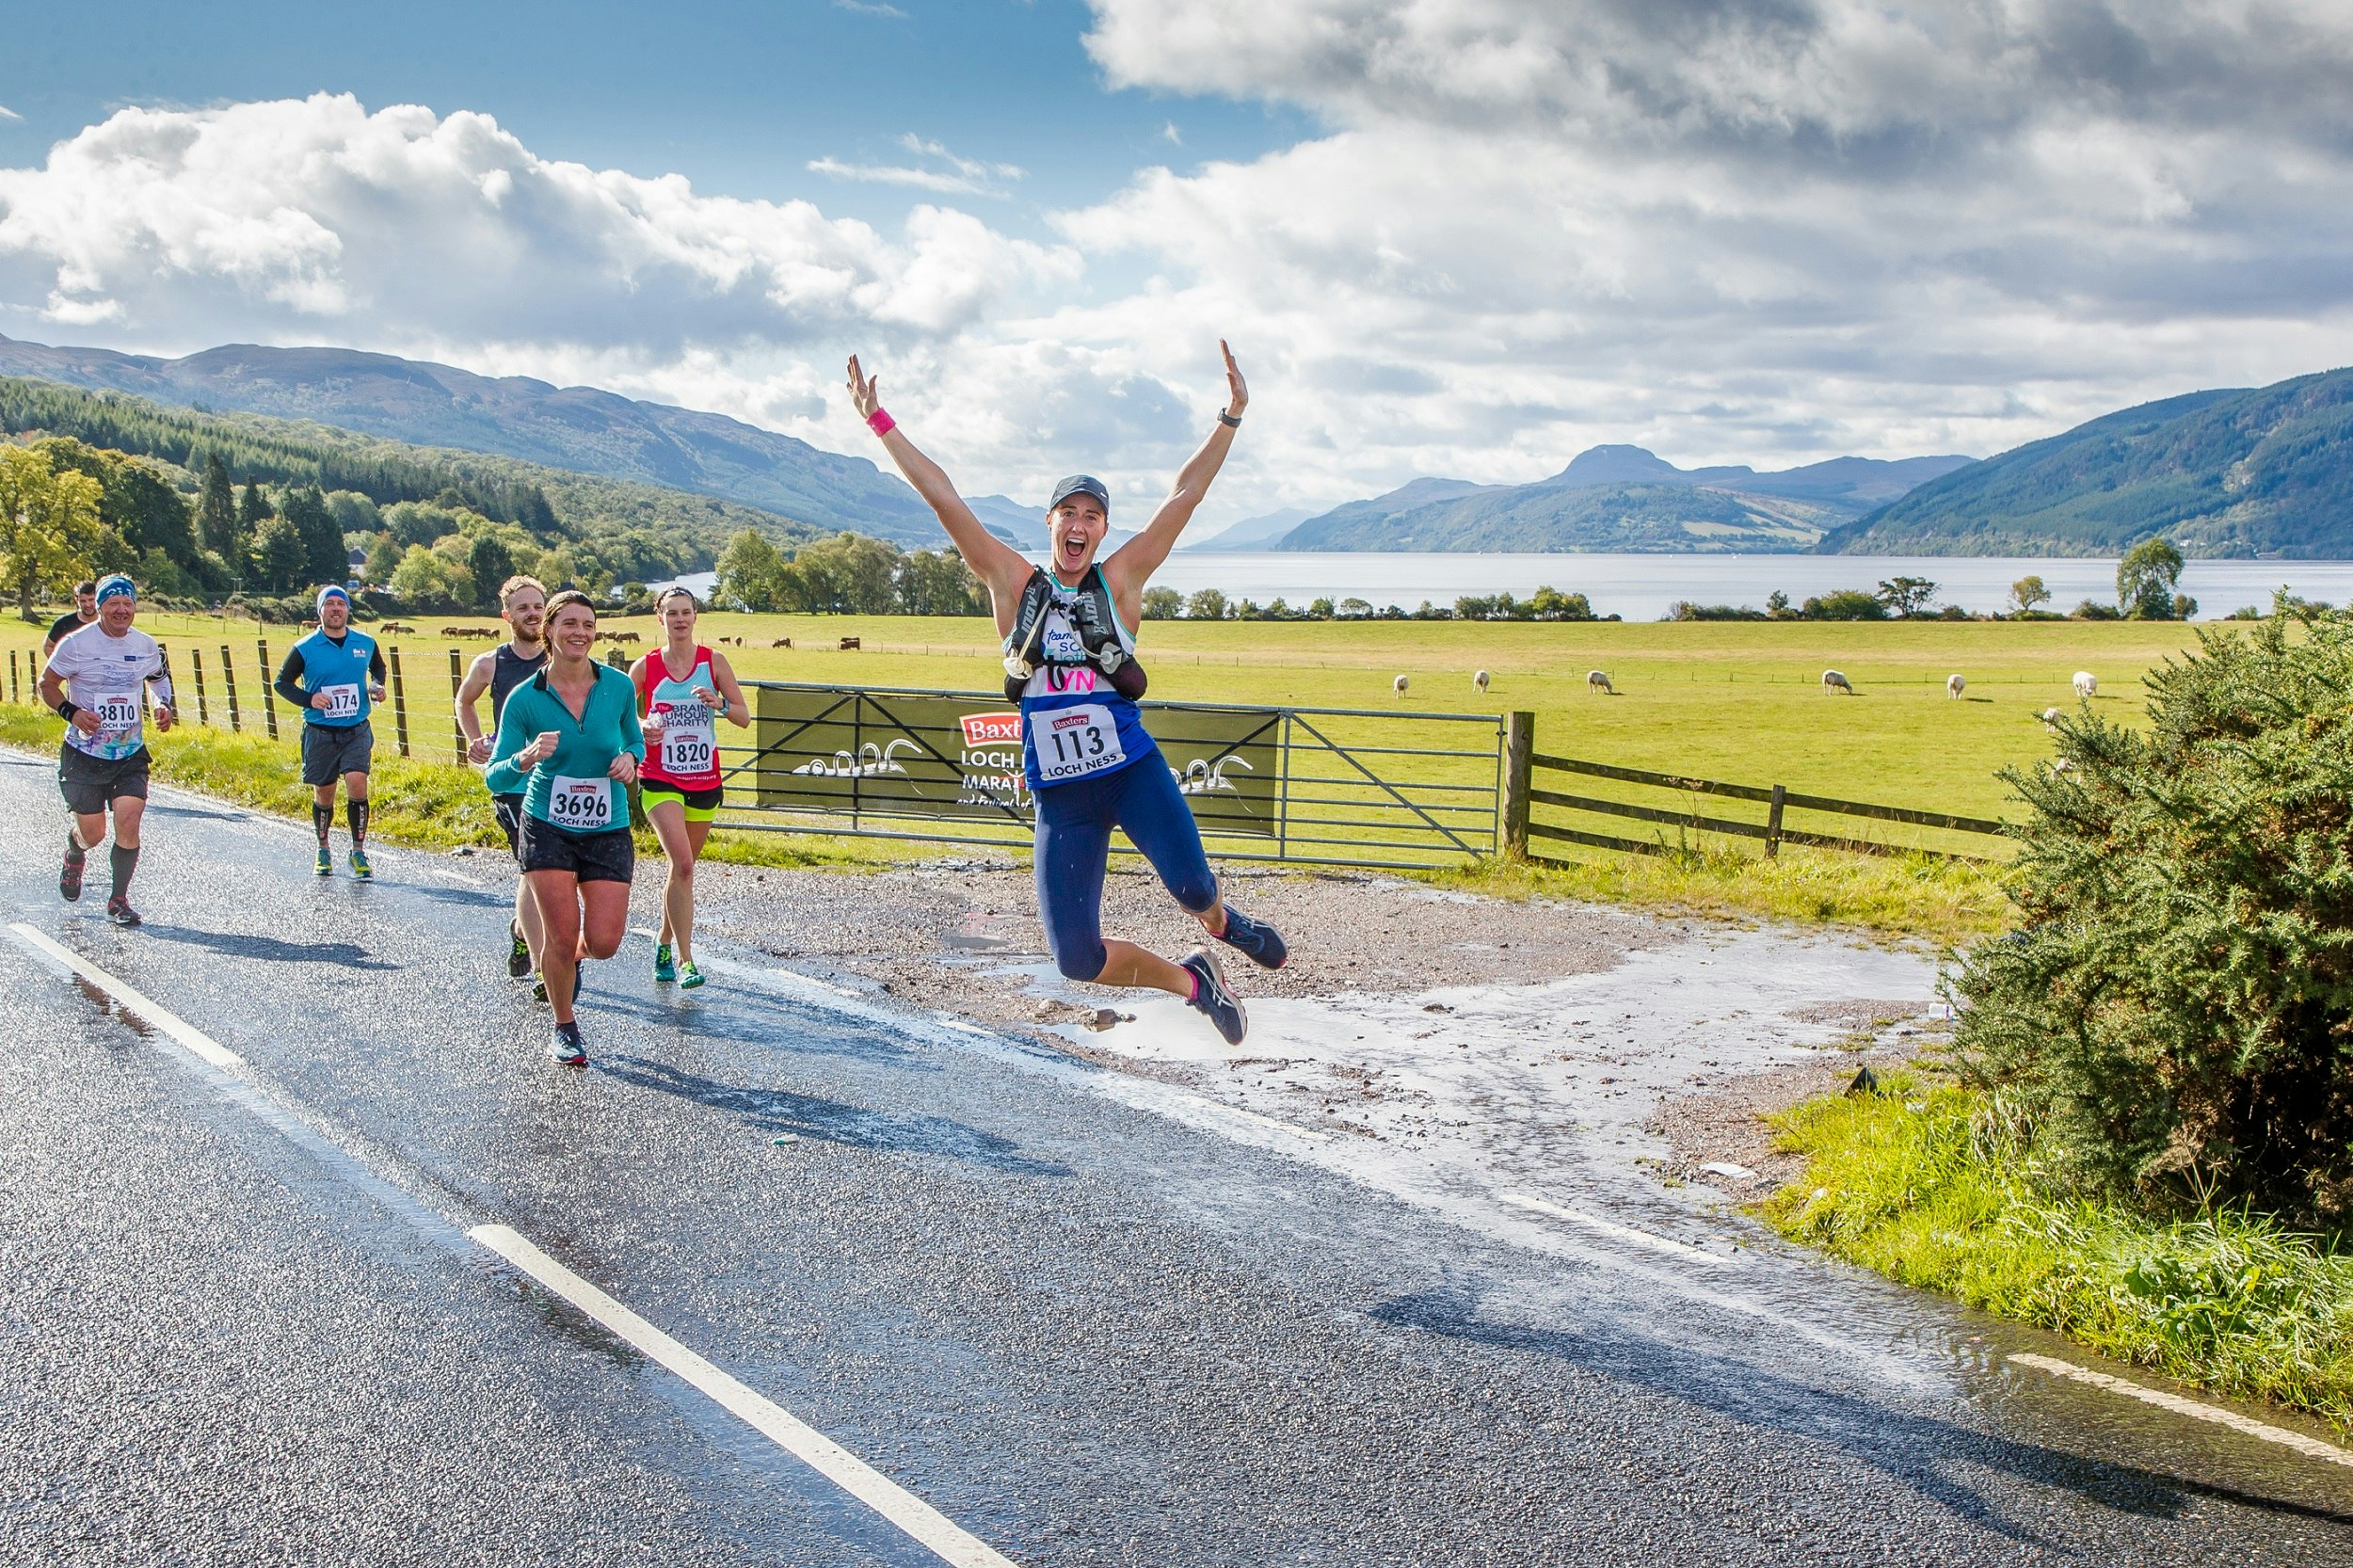 Half a dozen competitors run along a wet section of road along a farmer's field dotted with sheep; one runner is leaping in the air, with arms raised and heels clicking together. In the background are rolling green hills and Loch Ness.